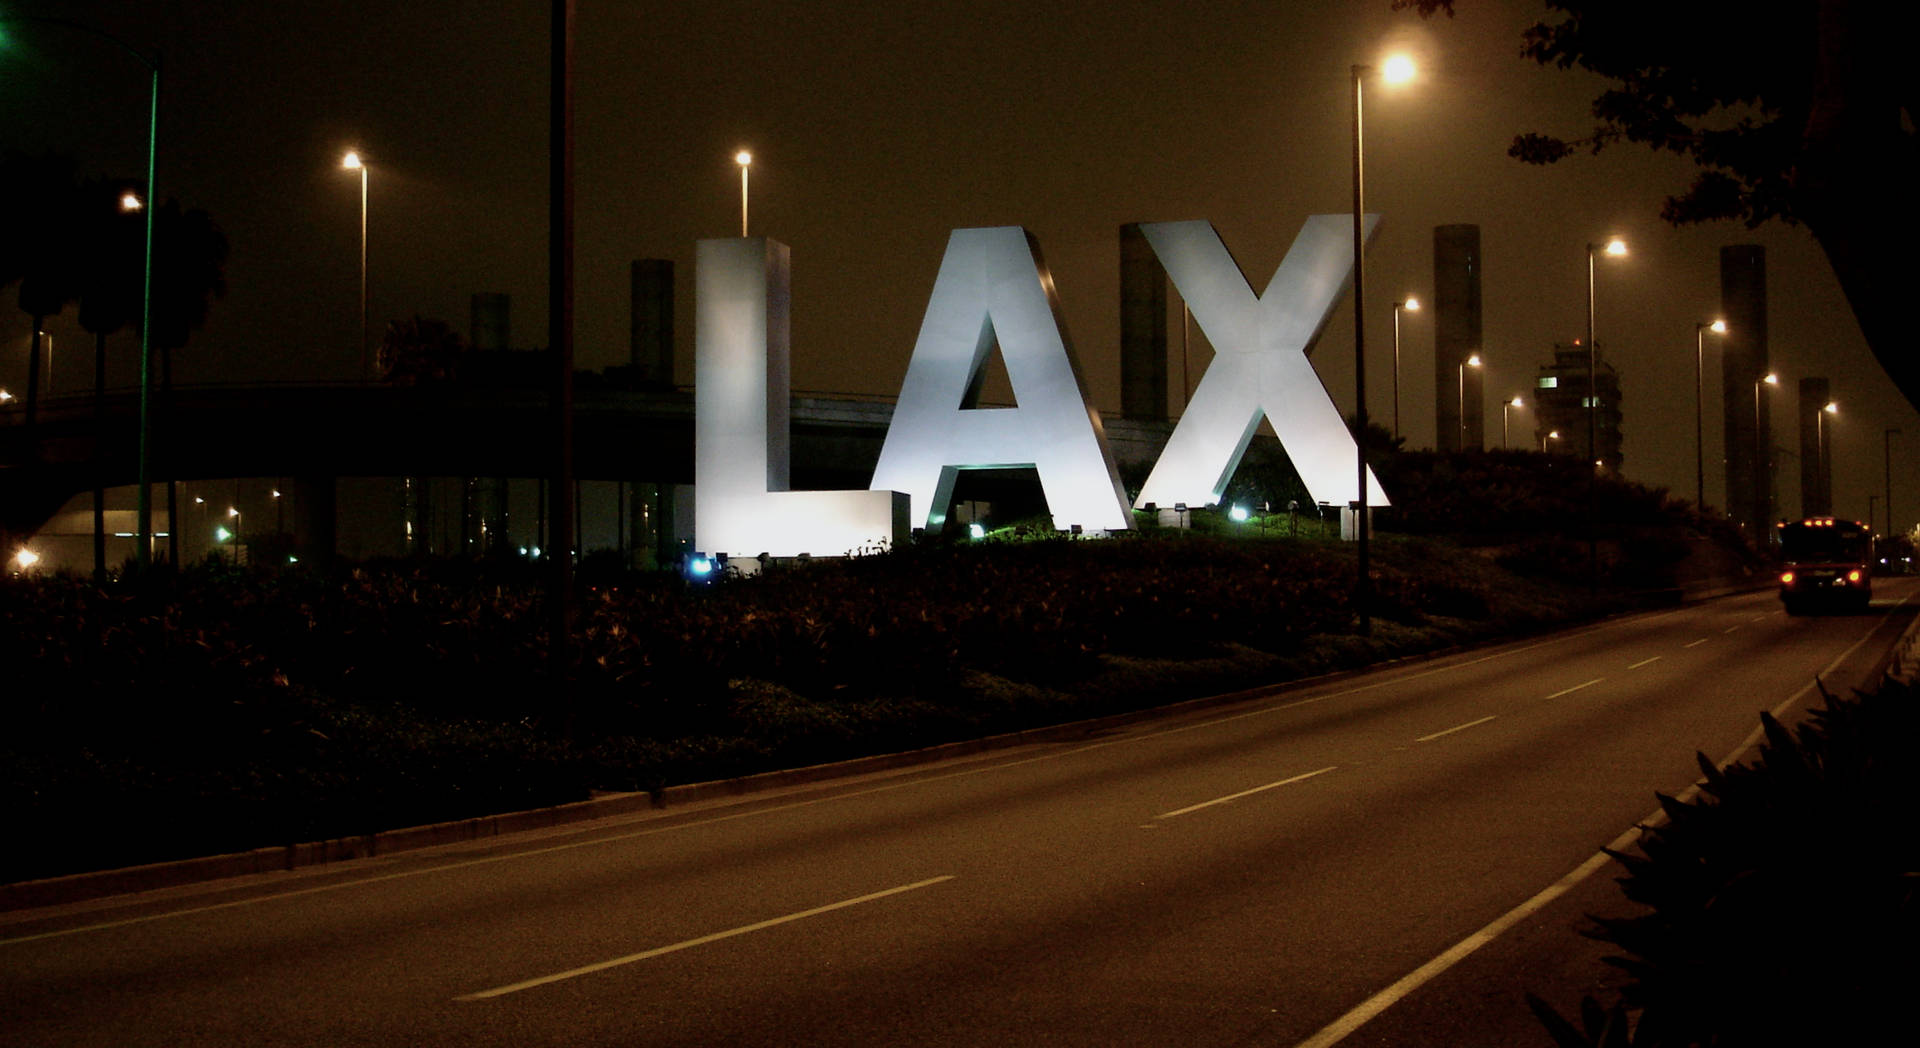 Make your way to the LAX - The Gateway to the World Wallpaper